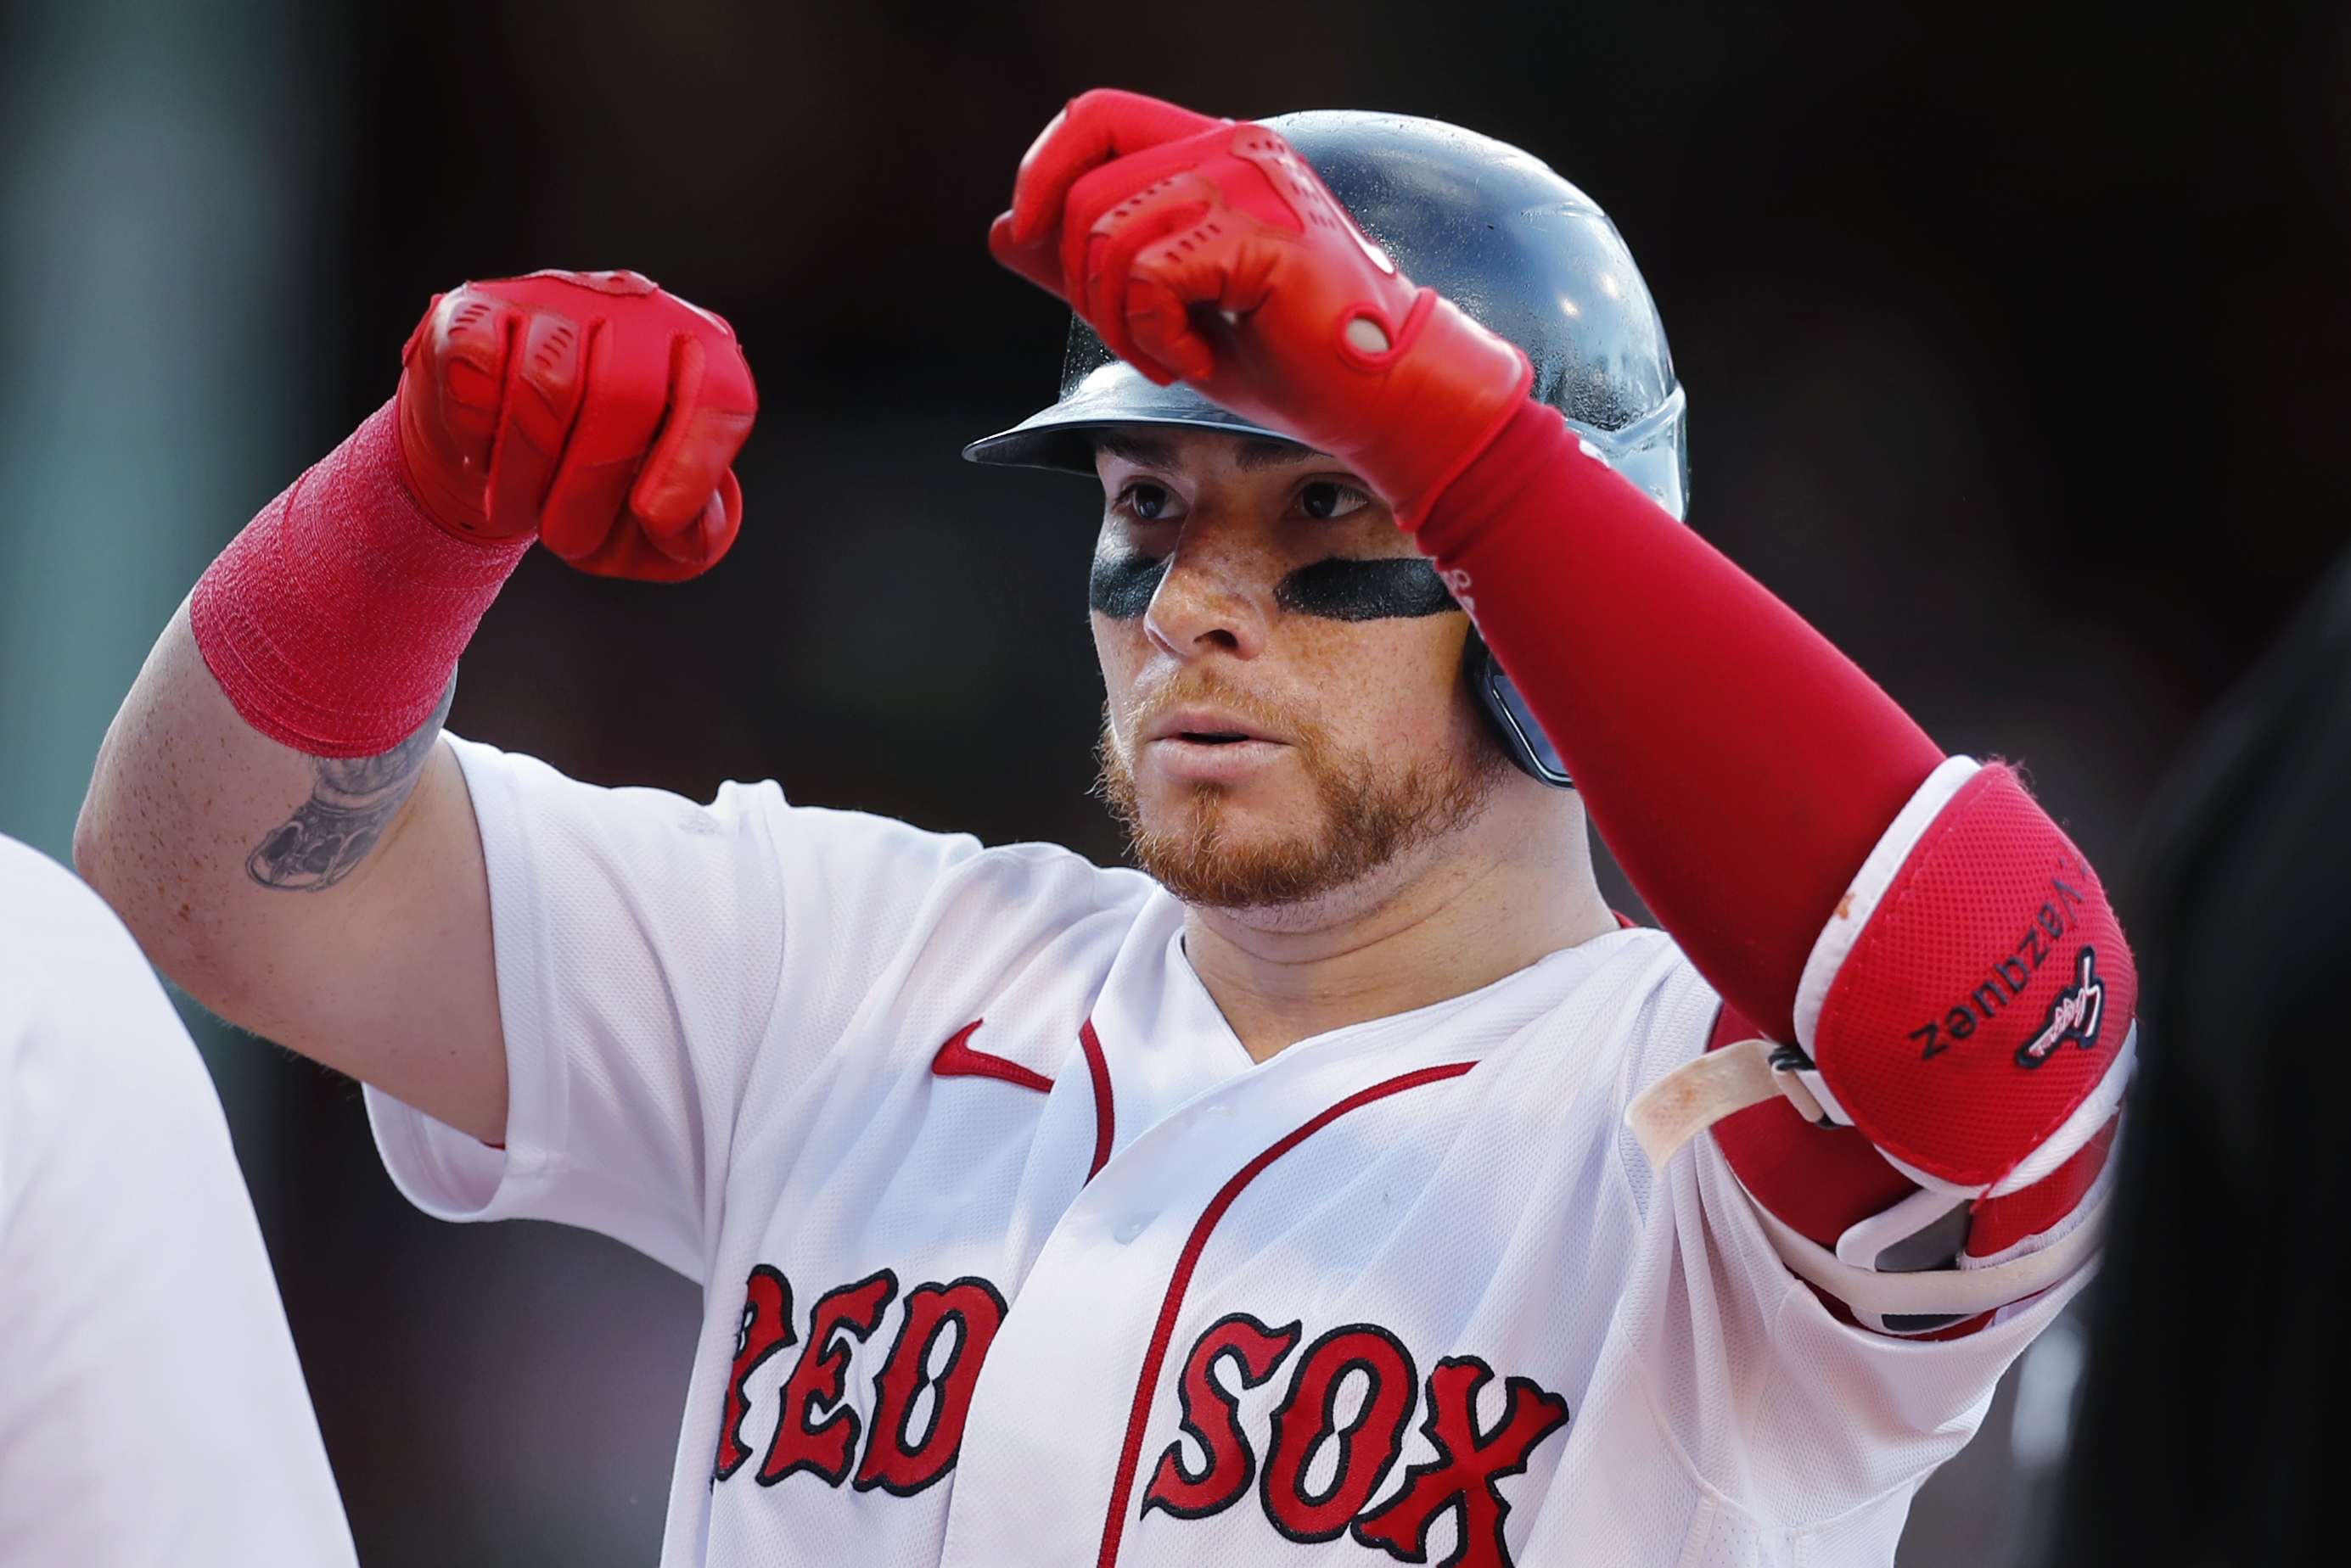 Christian Vázquez was on the field readying for the Red Sox' game against  the Astros. Then he got traded. - The Boston Globe